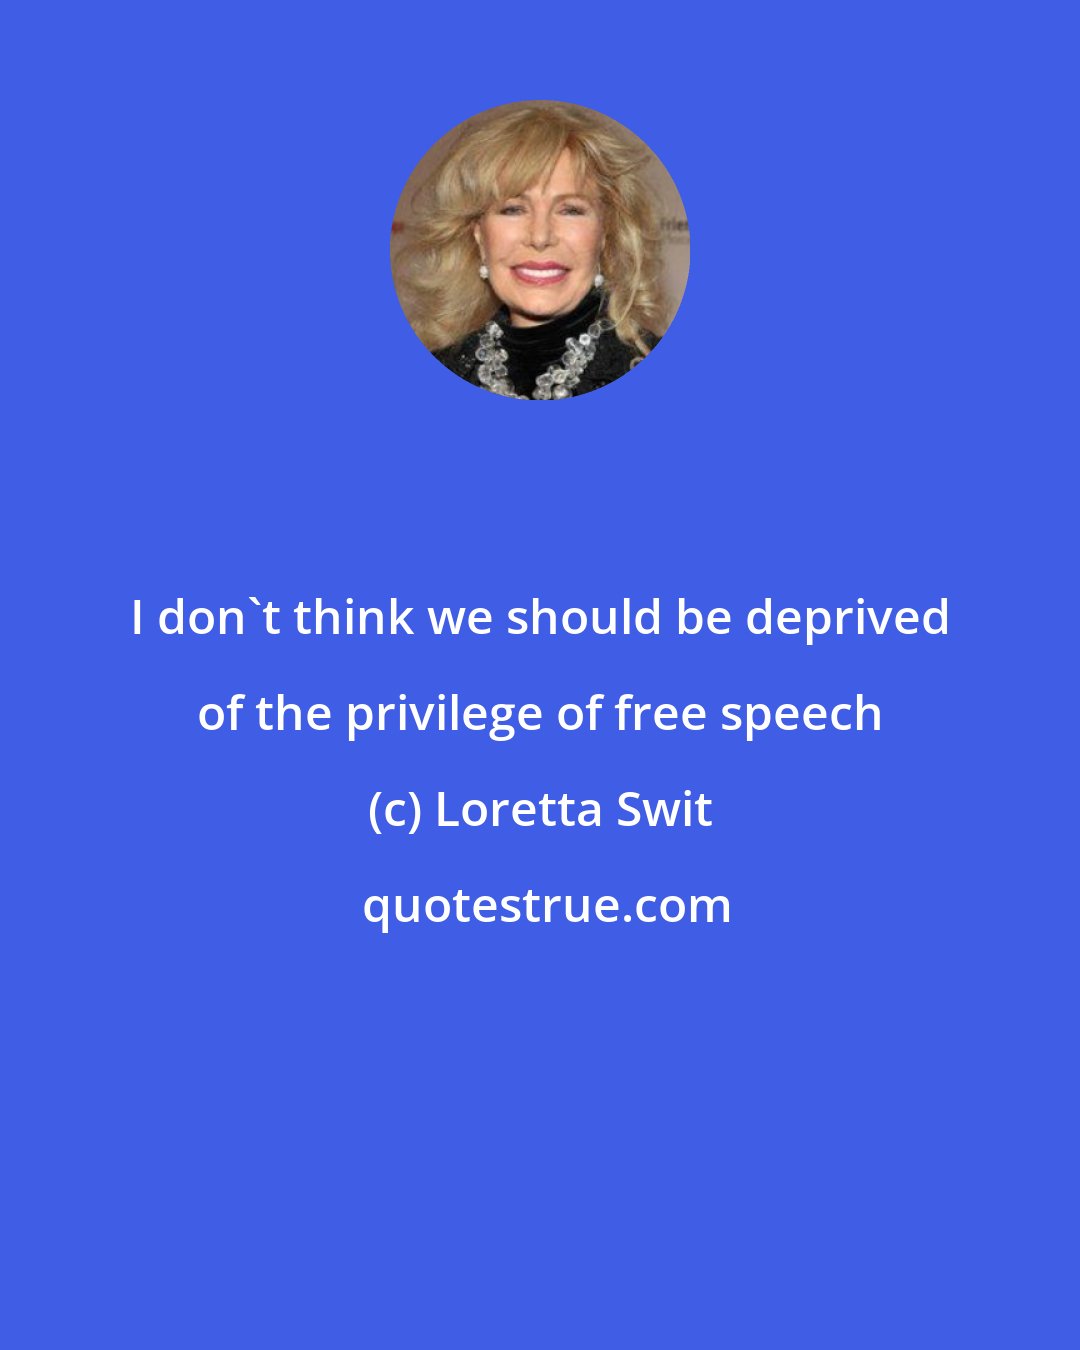 Loretta Swit: I don't think we should be deprived of the privilege of free speech